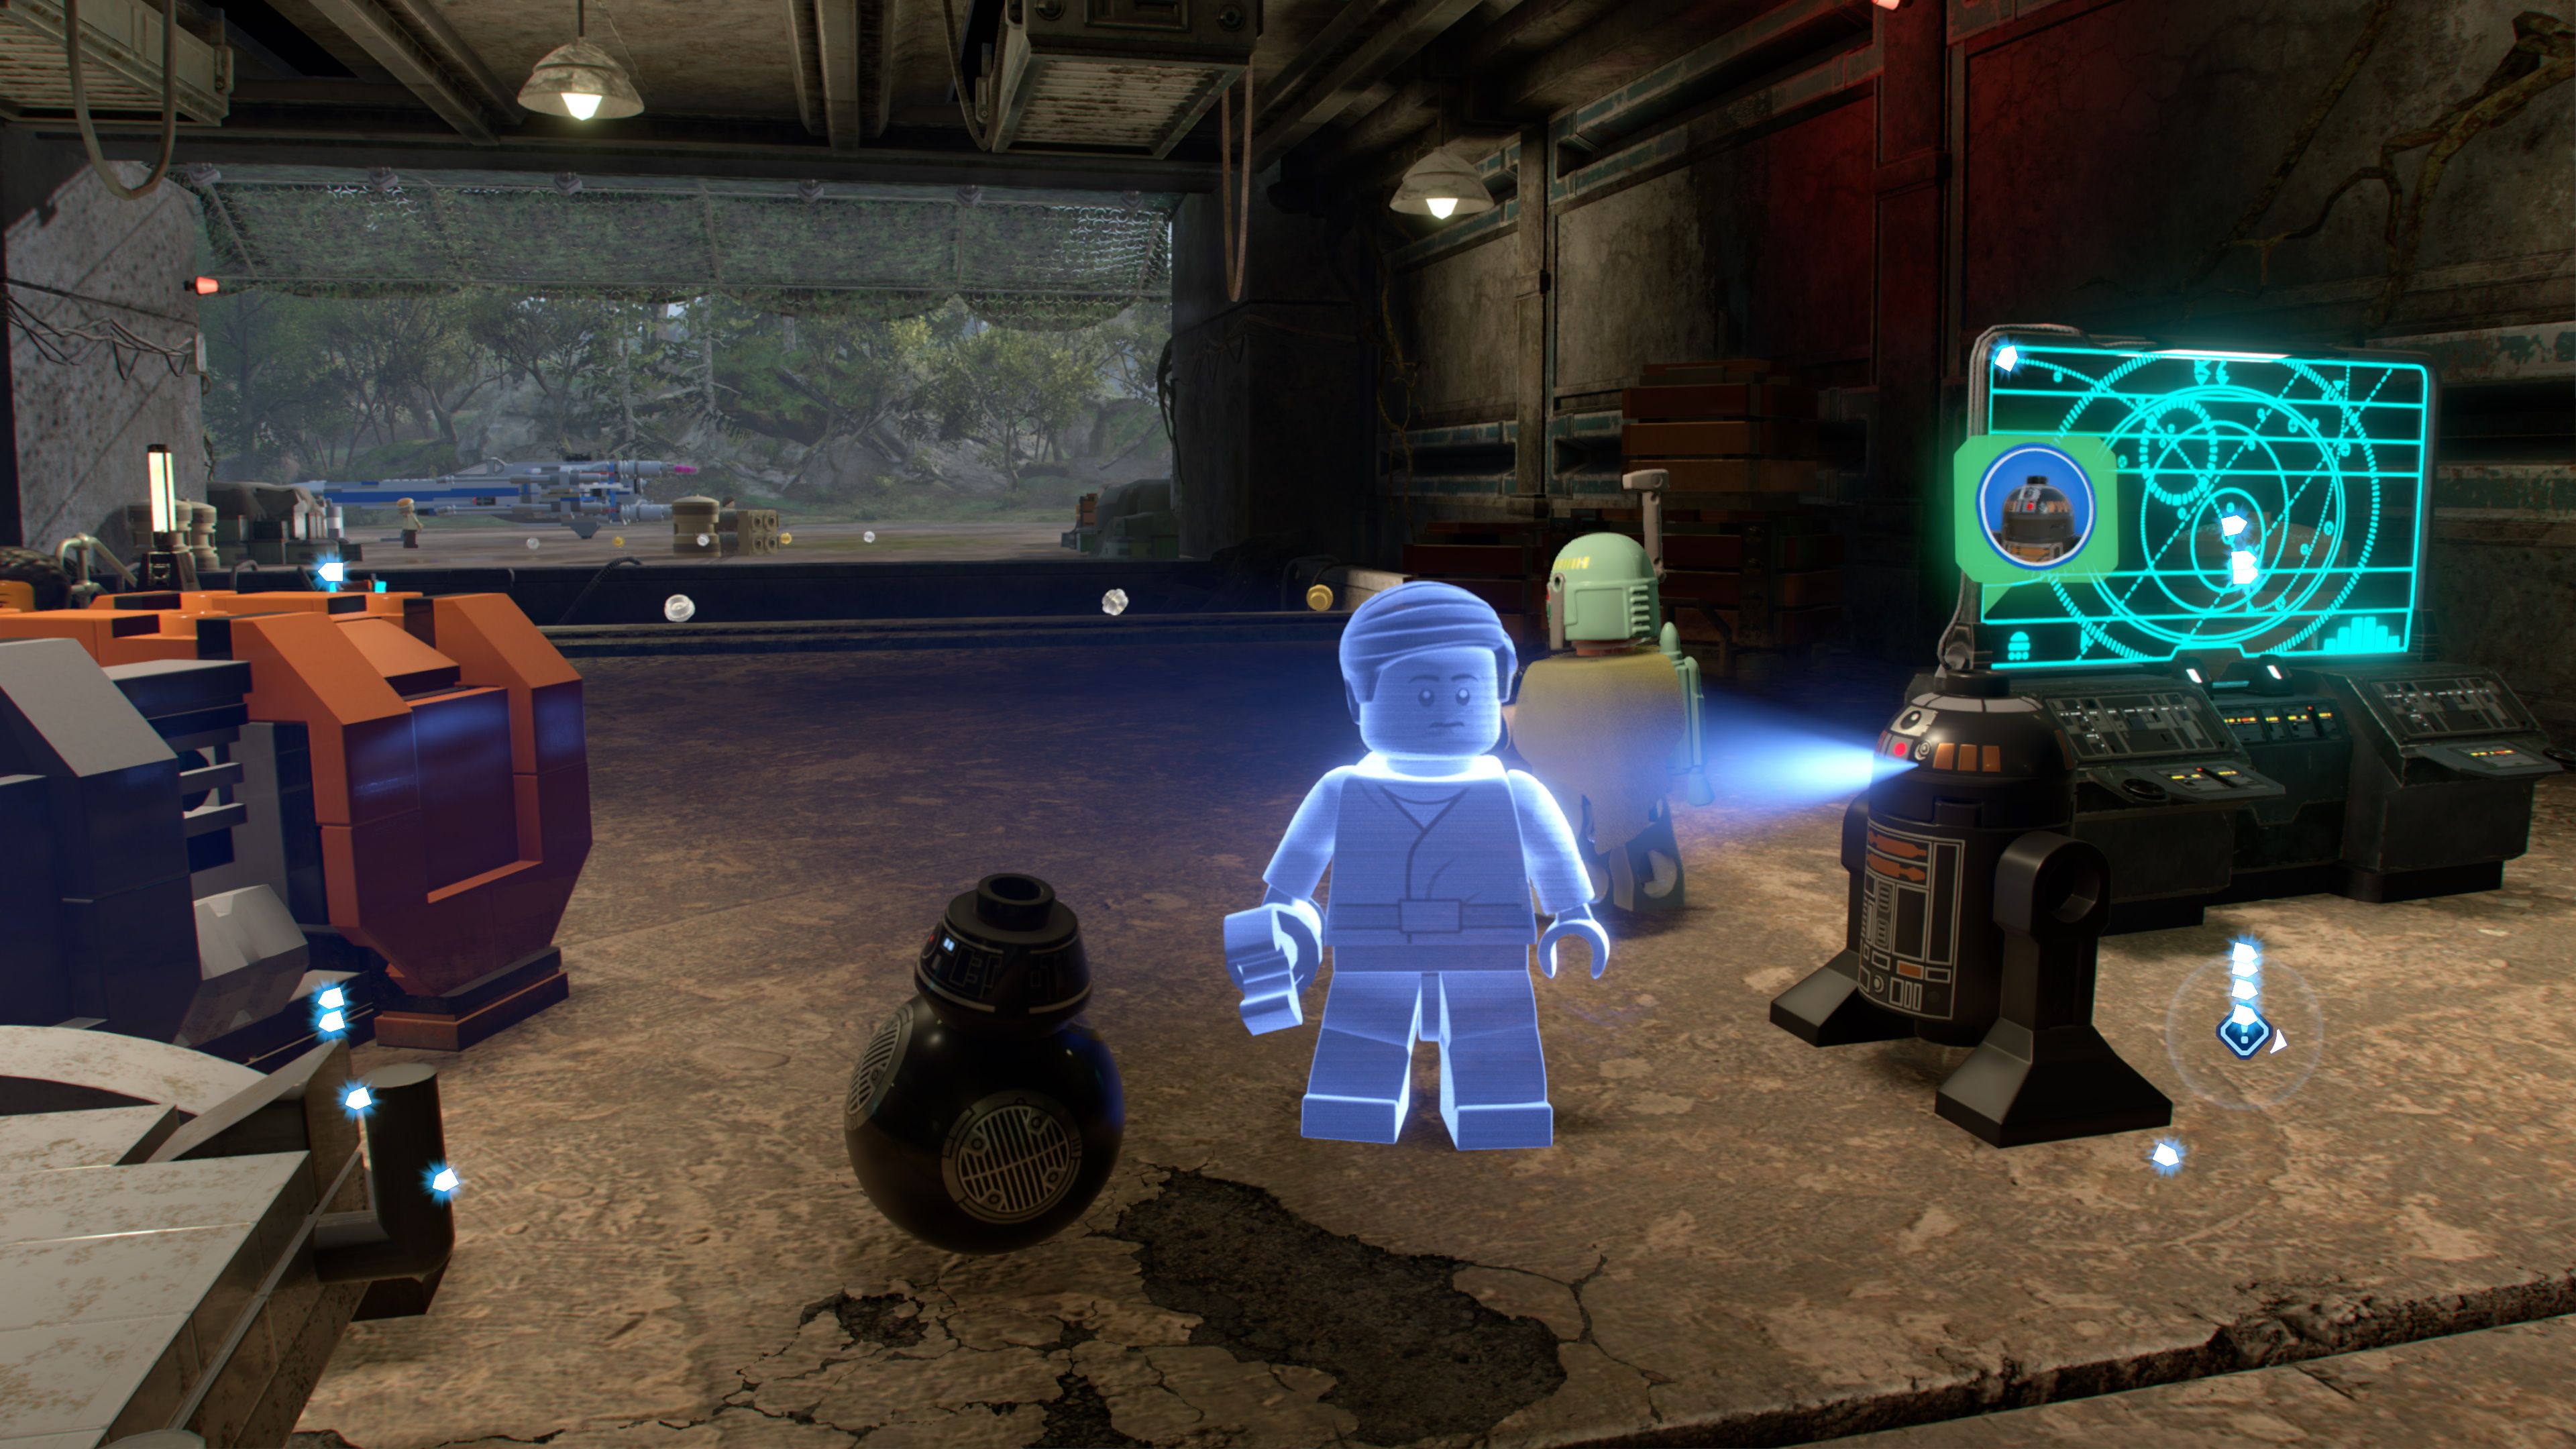 R2-Q5 showing a holographic image of the missing worker